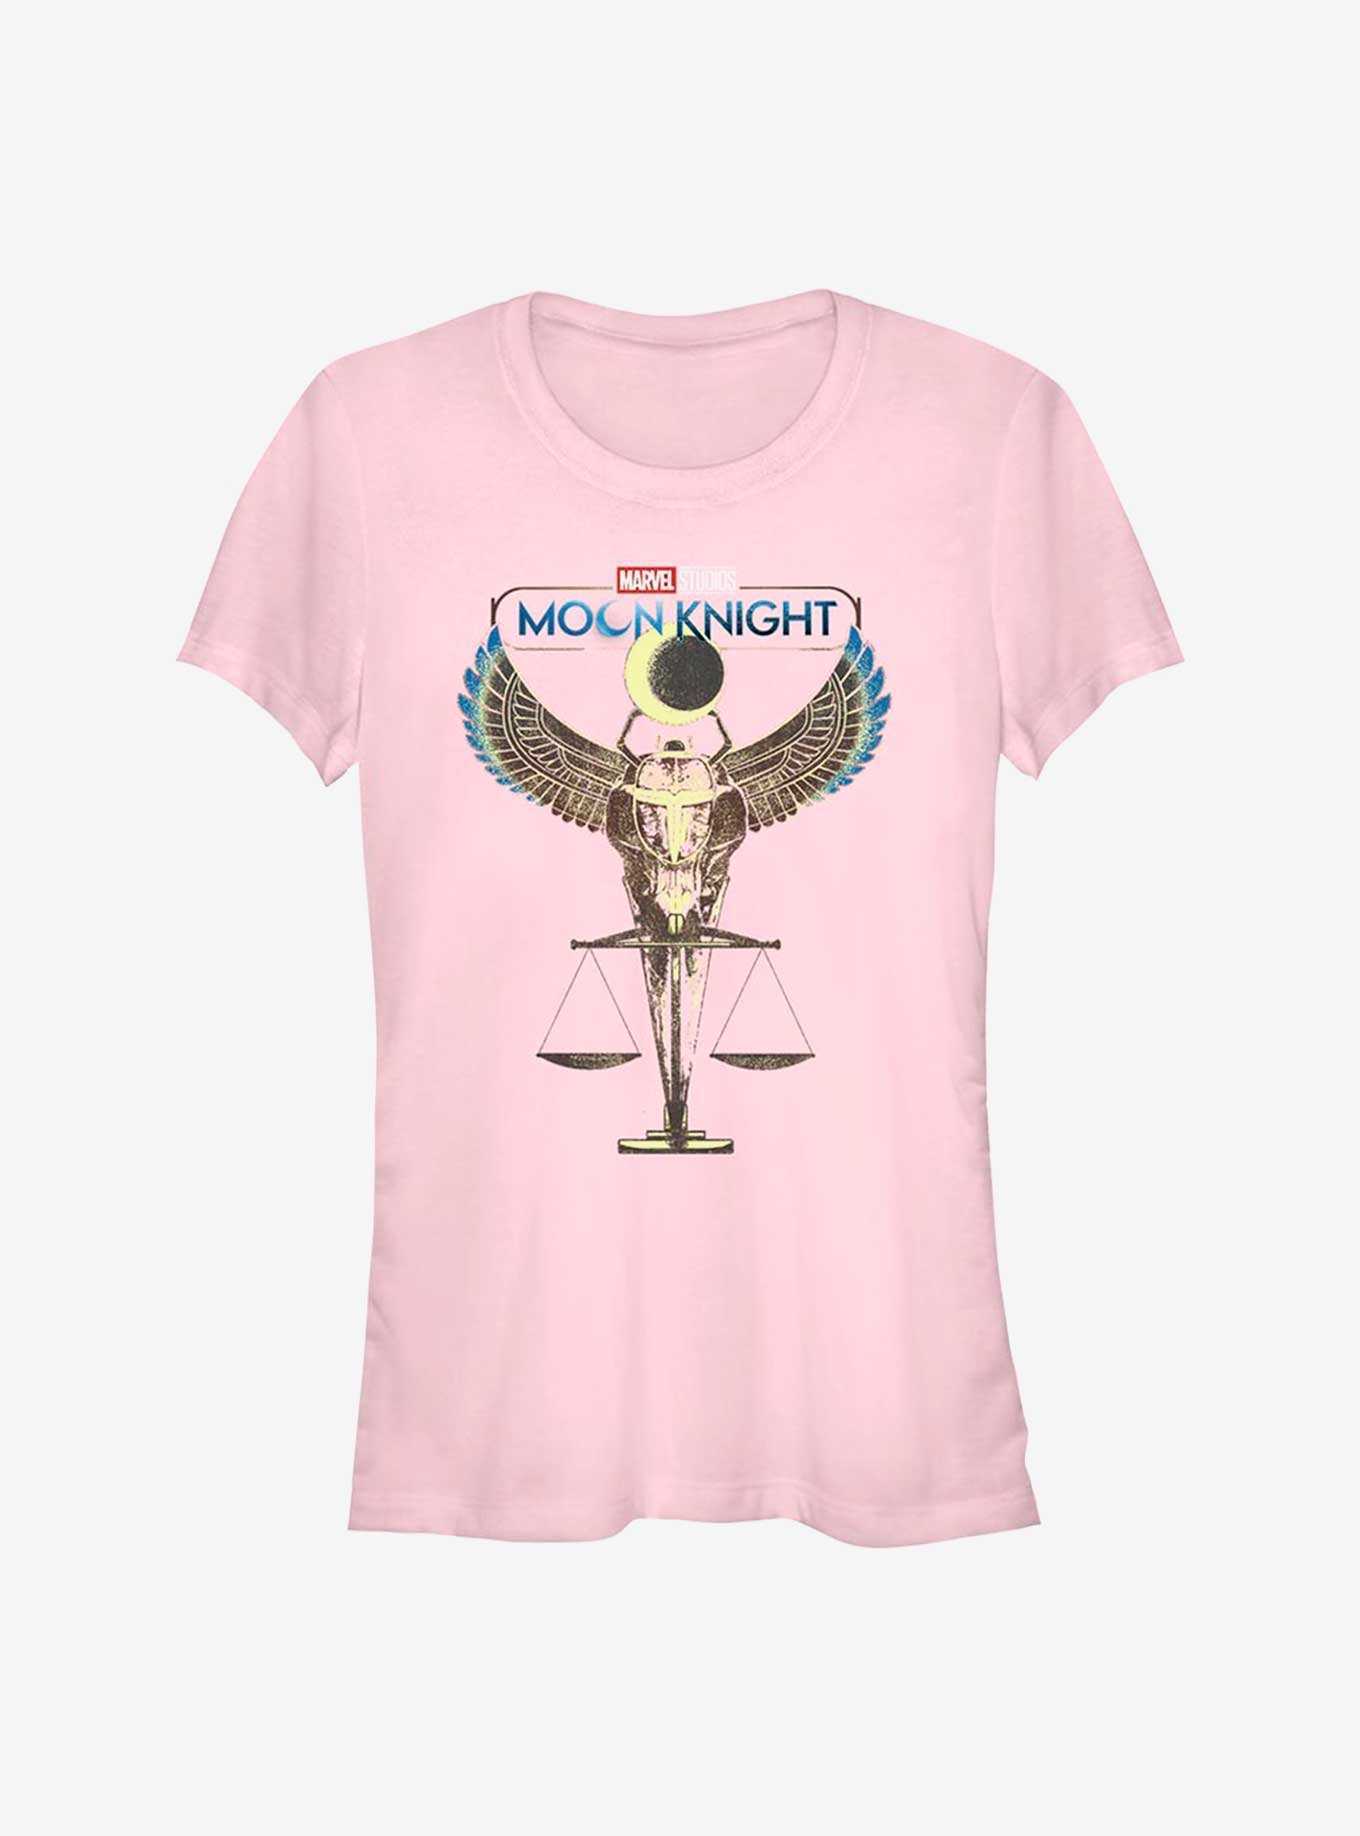 Marvel Moon Knight Scales of Justice Girls T-Shirt, , hi-res